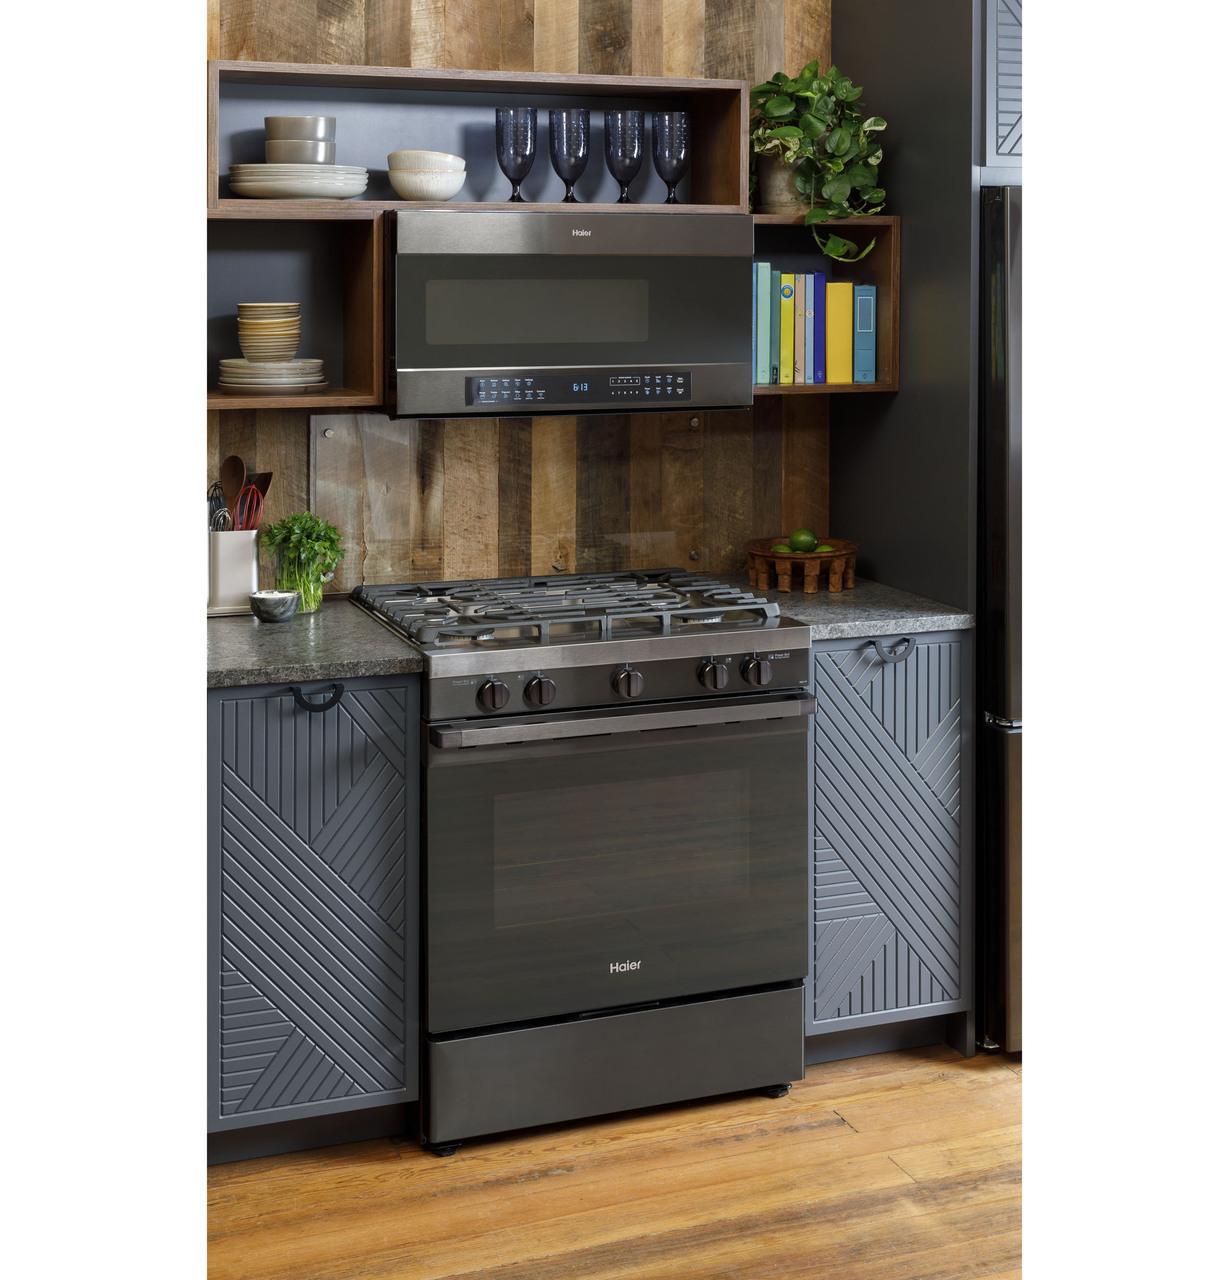 30" Smart Slide-In Gas Range with Convection